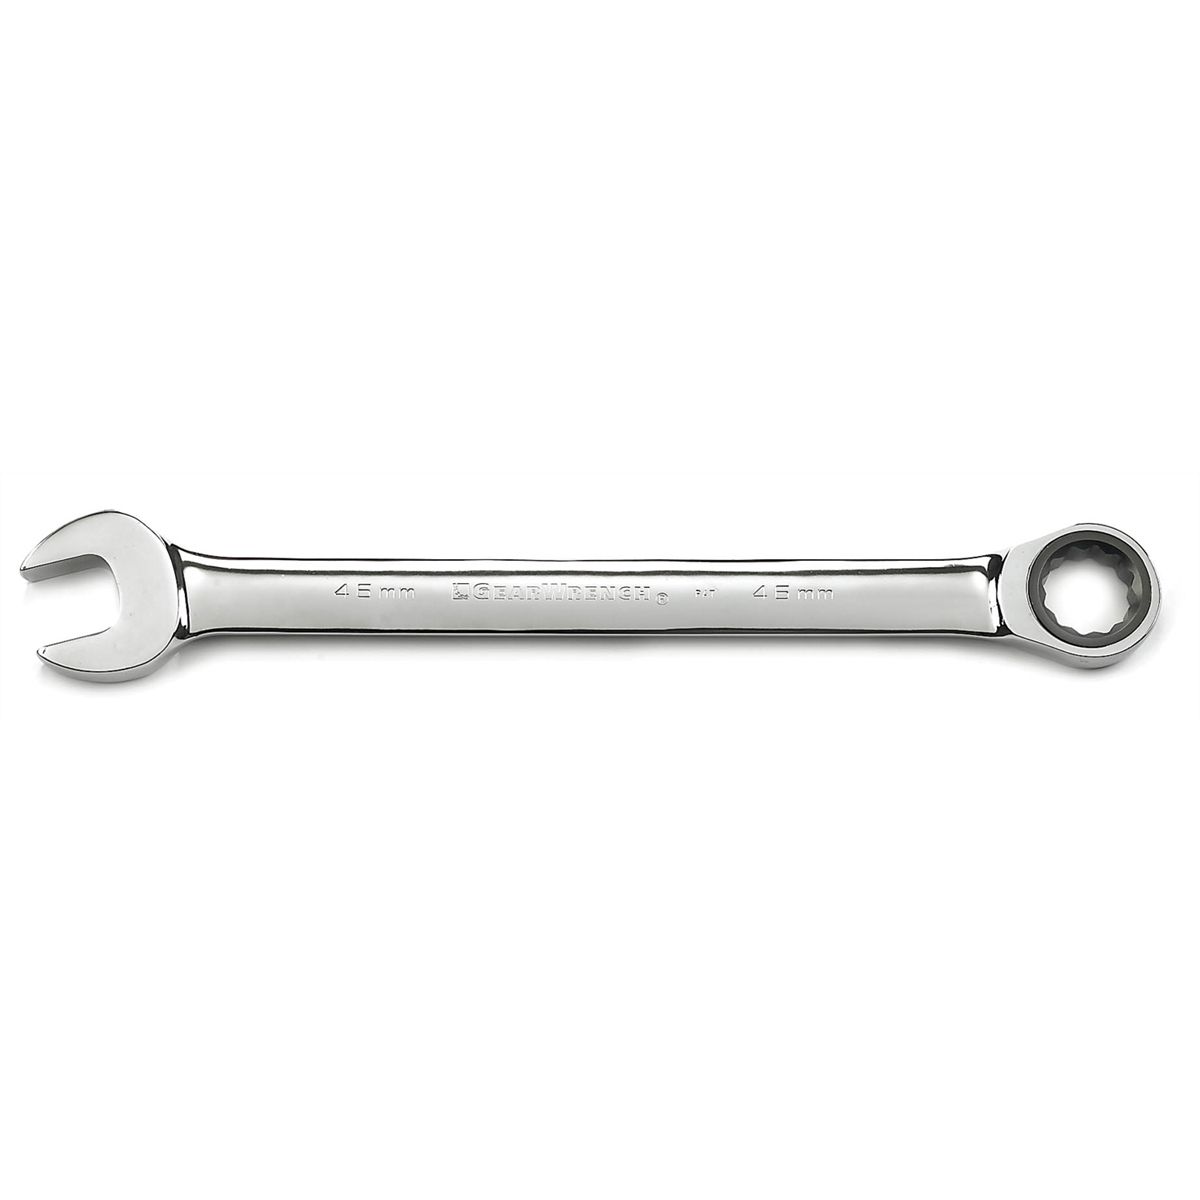 1-3/8" Combination Ratcheting Wrench SAE